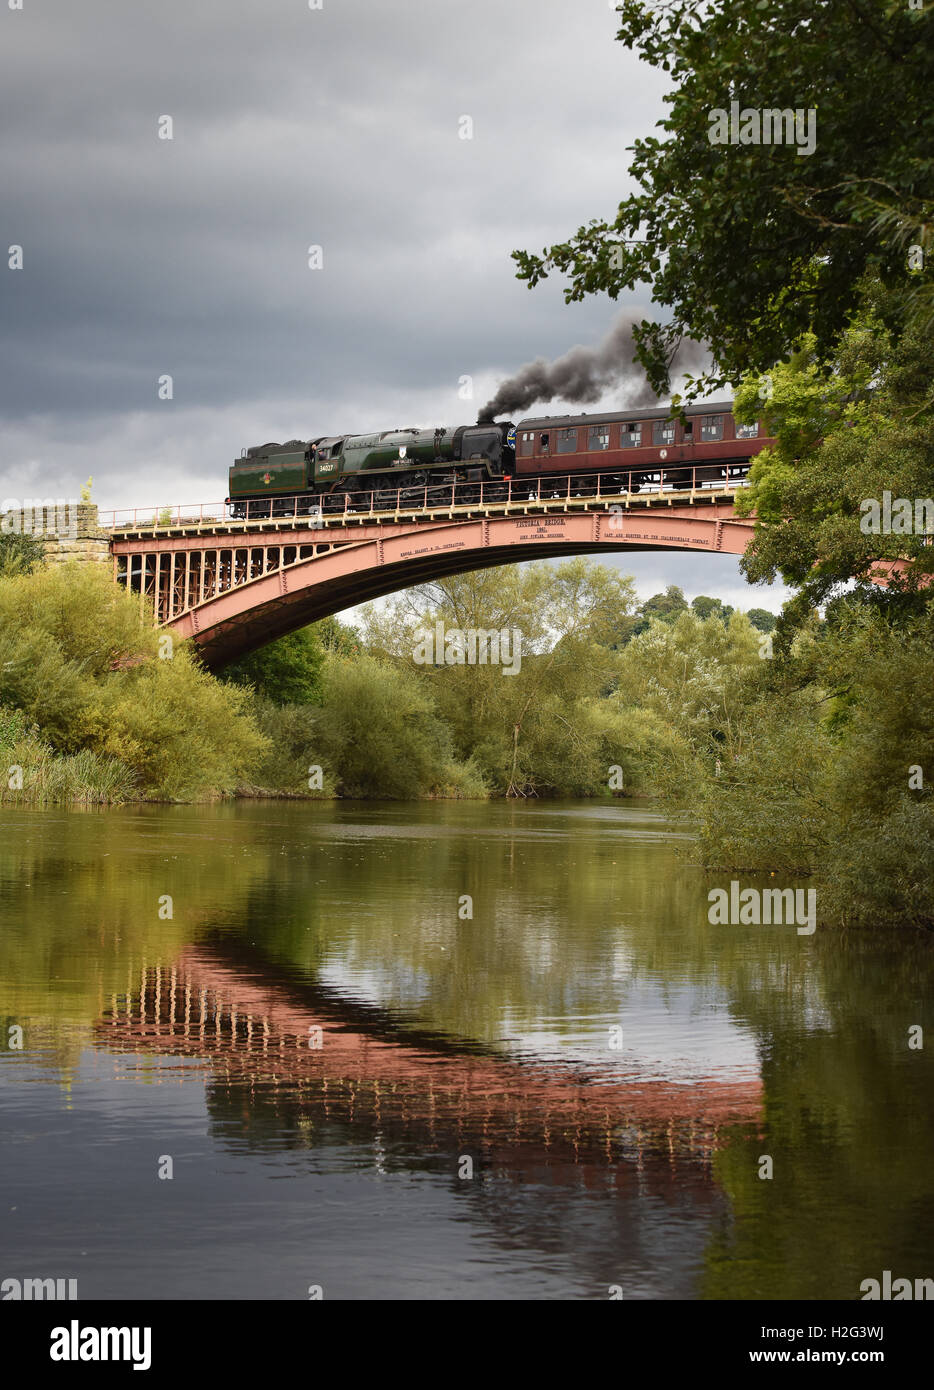 The Taw Valley steam locomotive crossing the River Severn on the Severn Valley Railway Victoria Bridge at Arley in Shropshire. Stock Photo